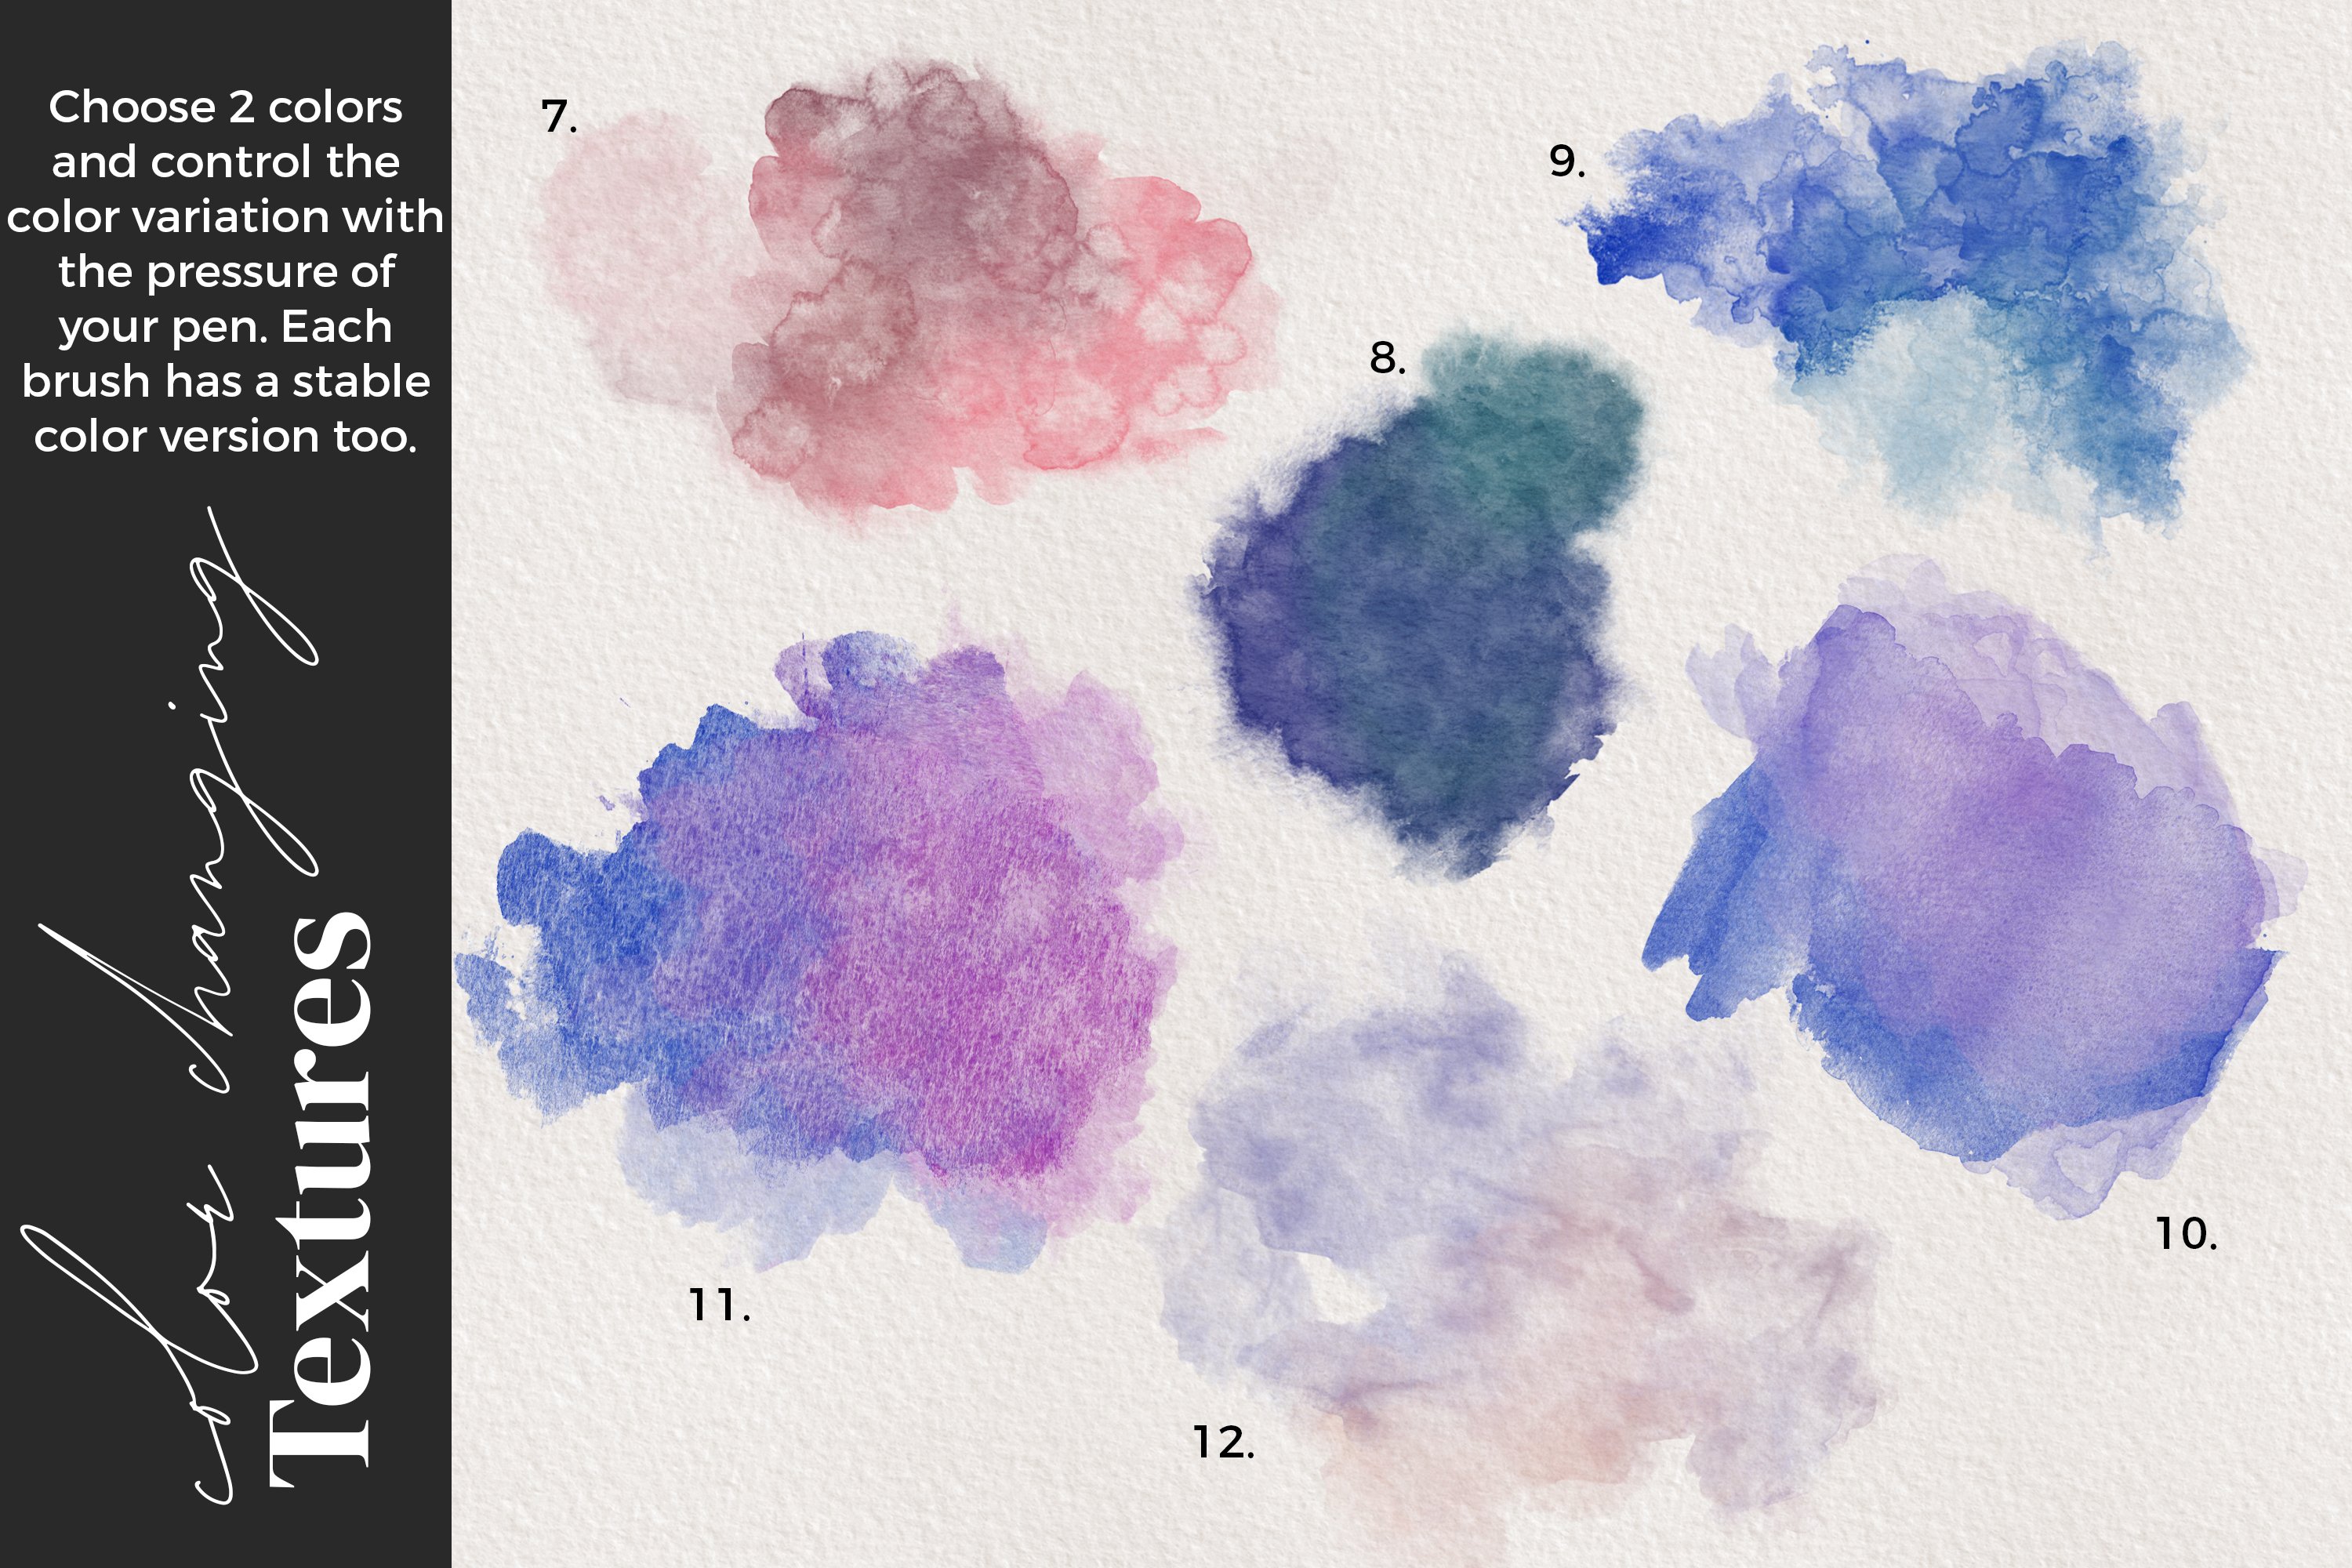 Each brush has a stable color version too.